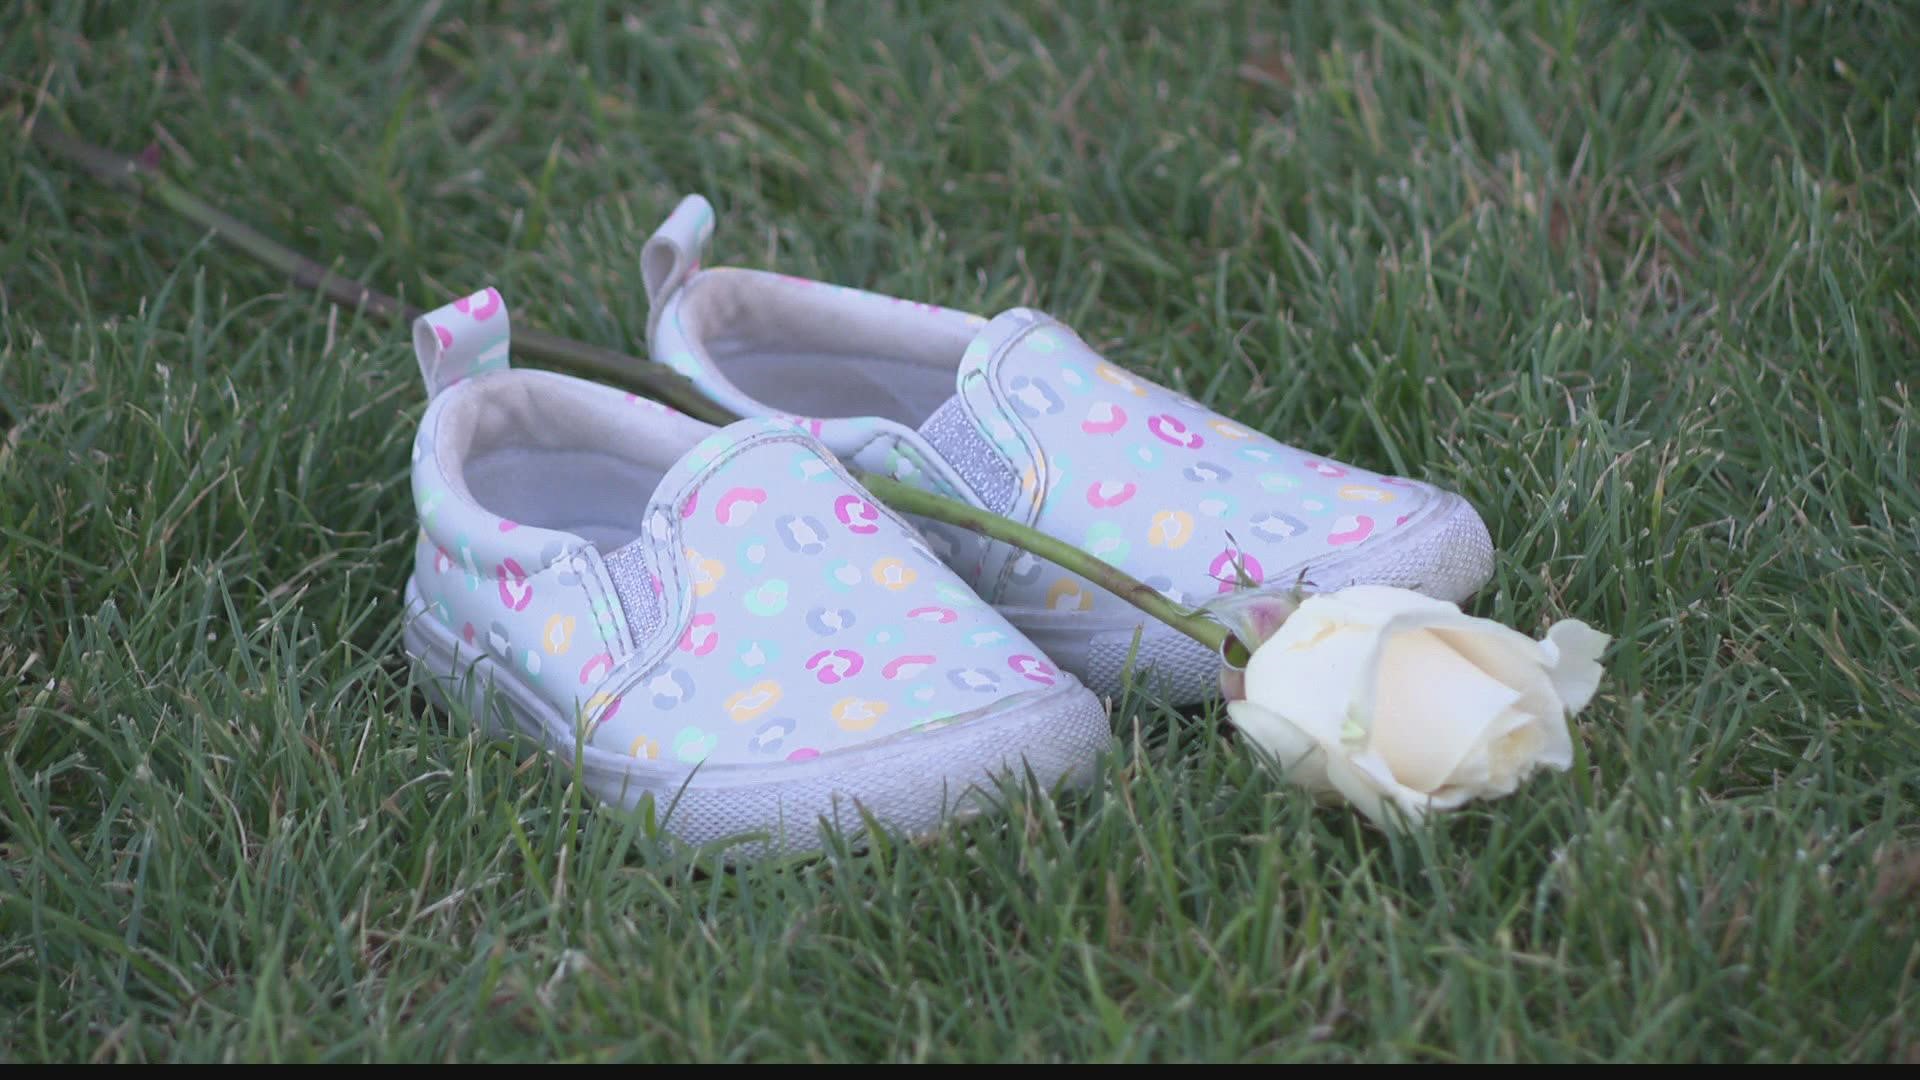 Nineteen pairs of children’s shoes were laid out to represent the 19 children lost in the mass shooting.